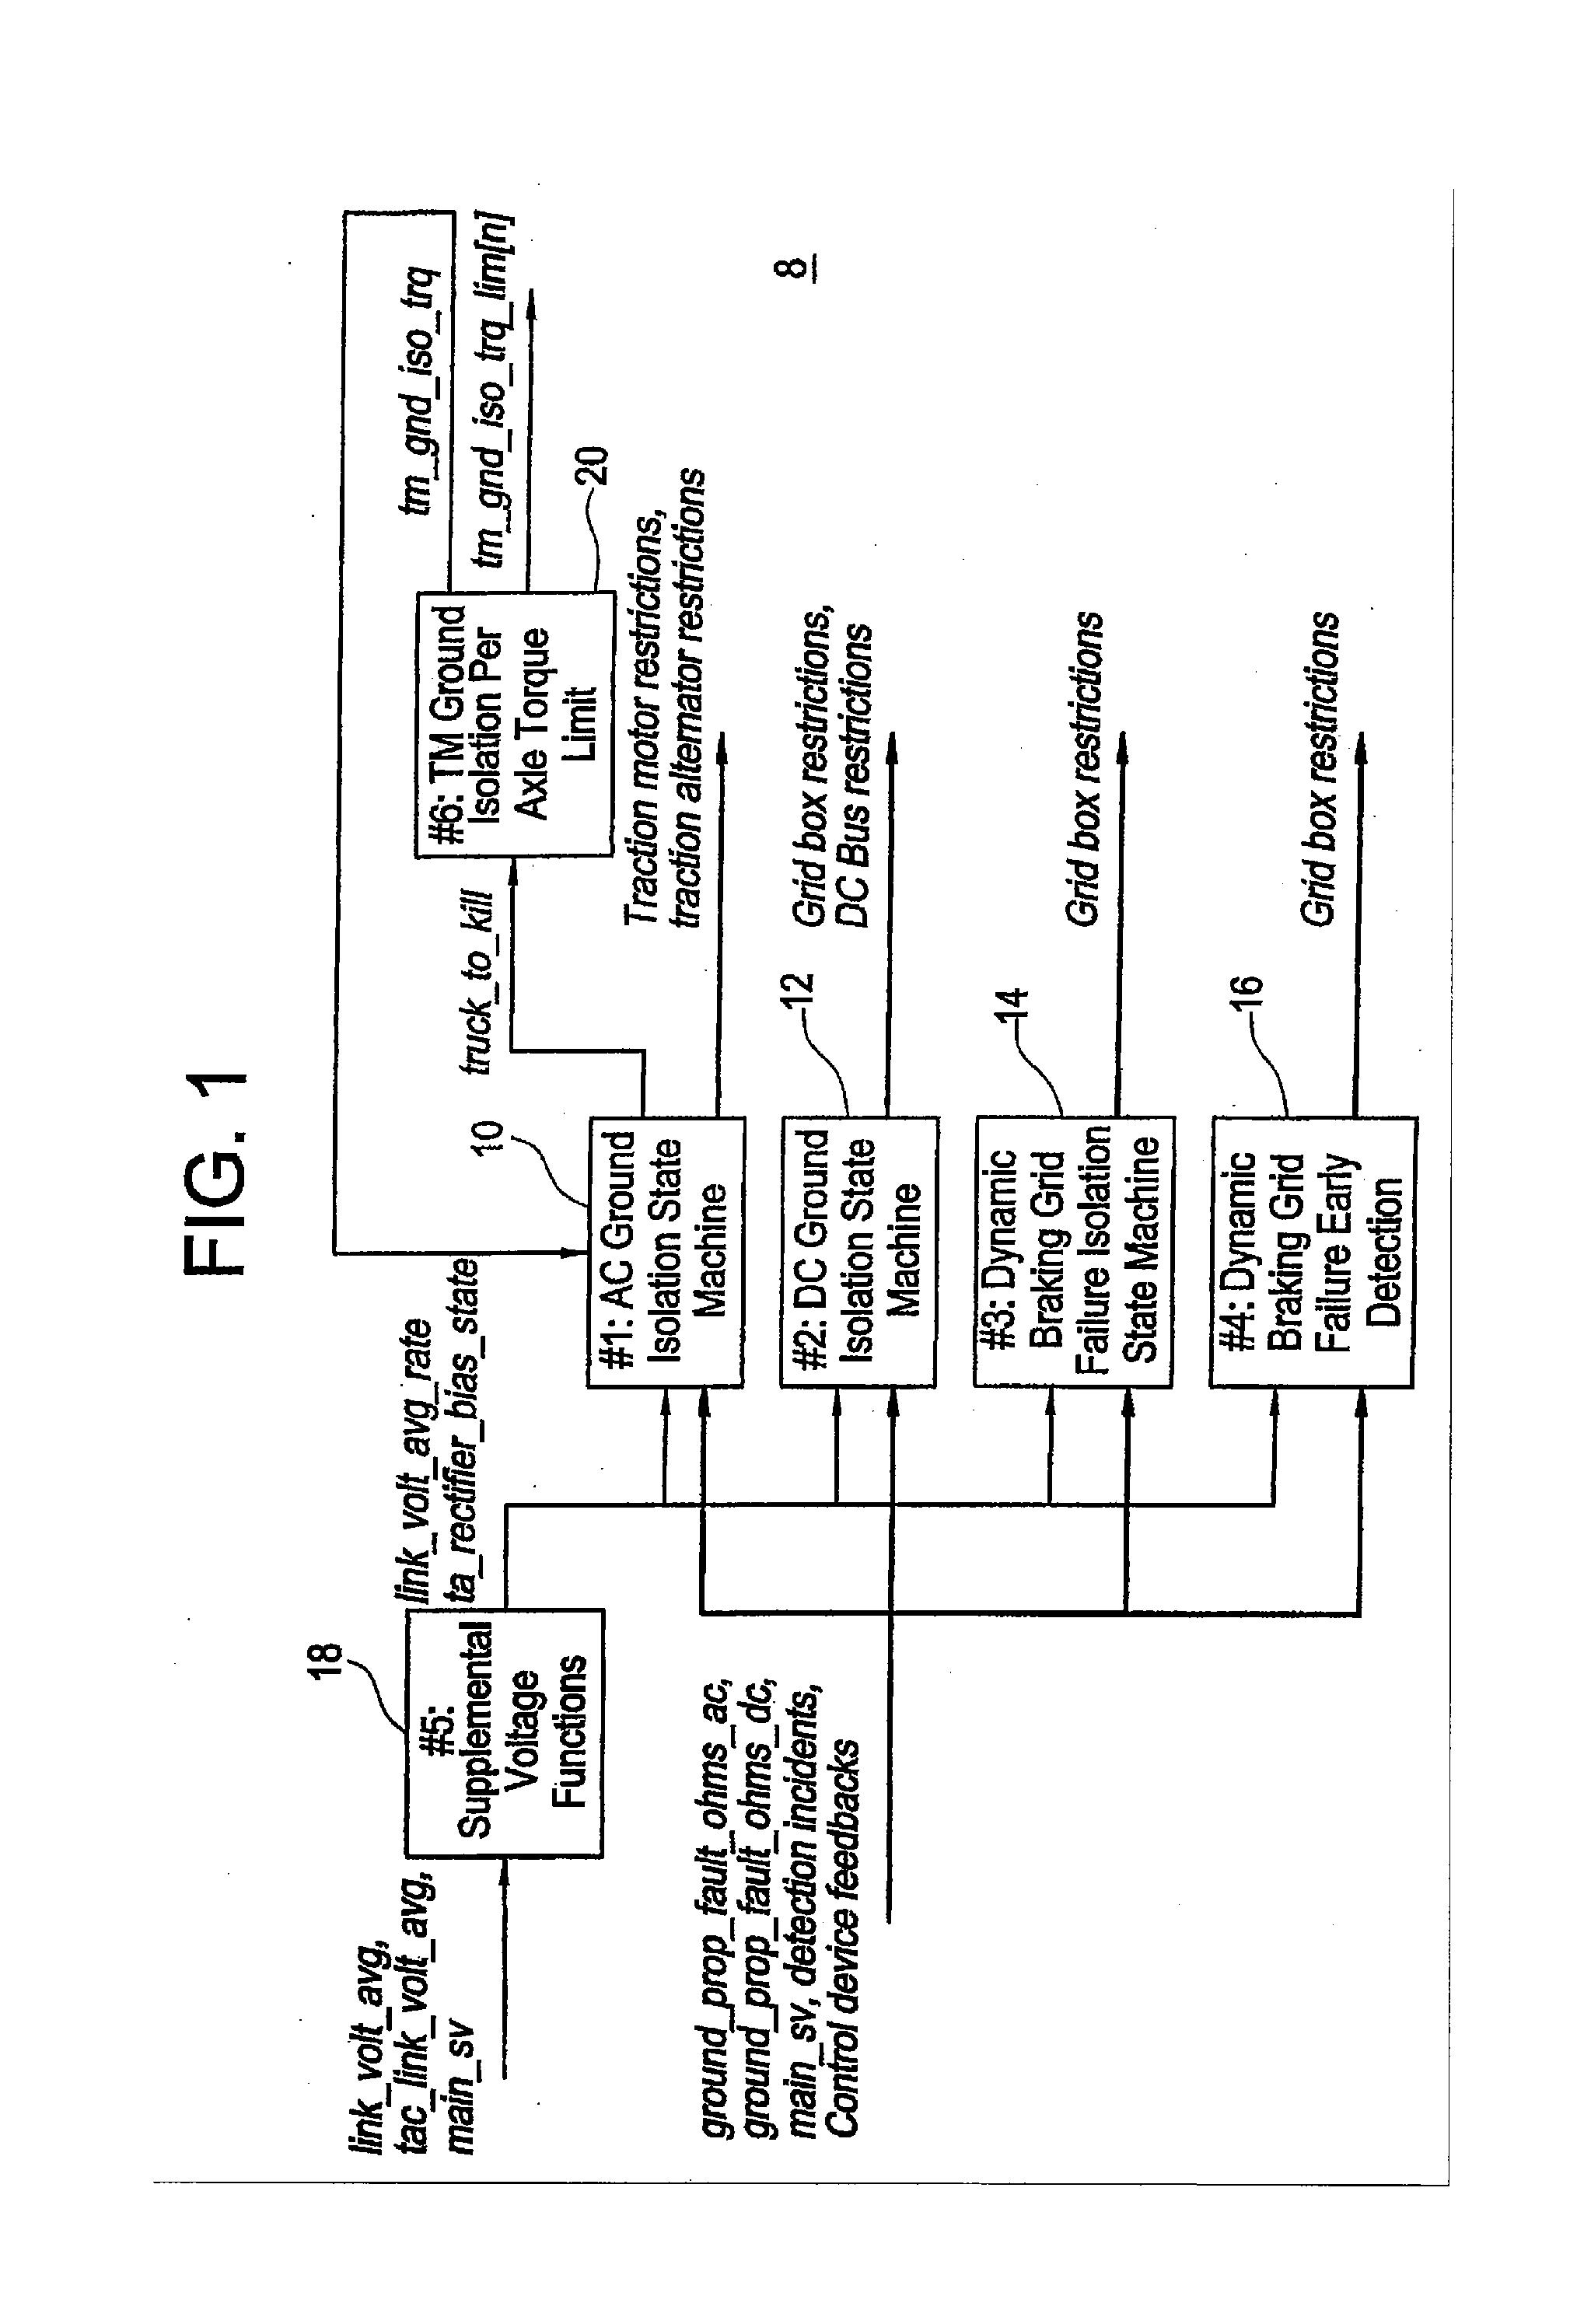 Method, System, and Computer Software Code for Detection and Isolation of Electrical Ground Failure and Secondary Failure